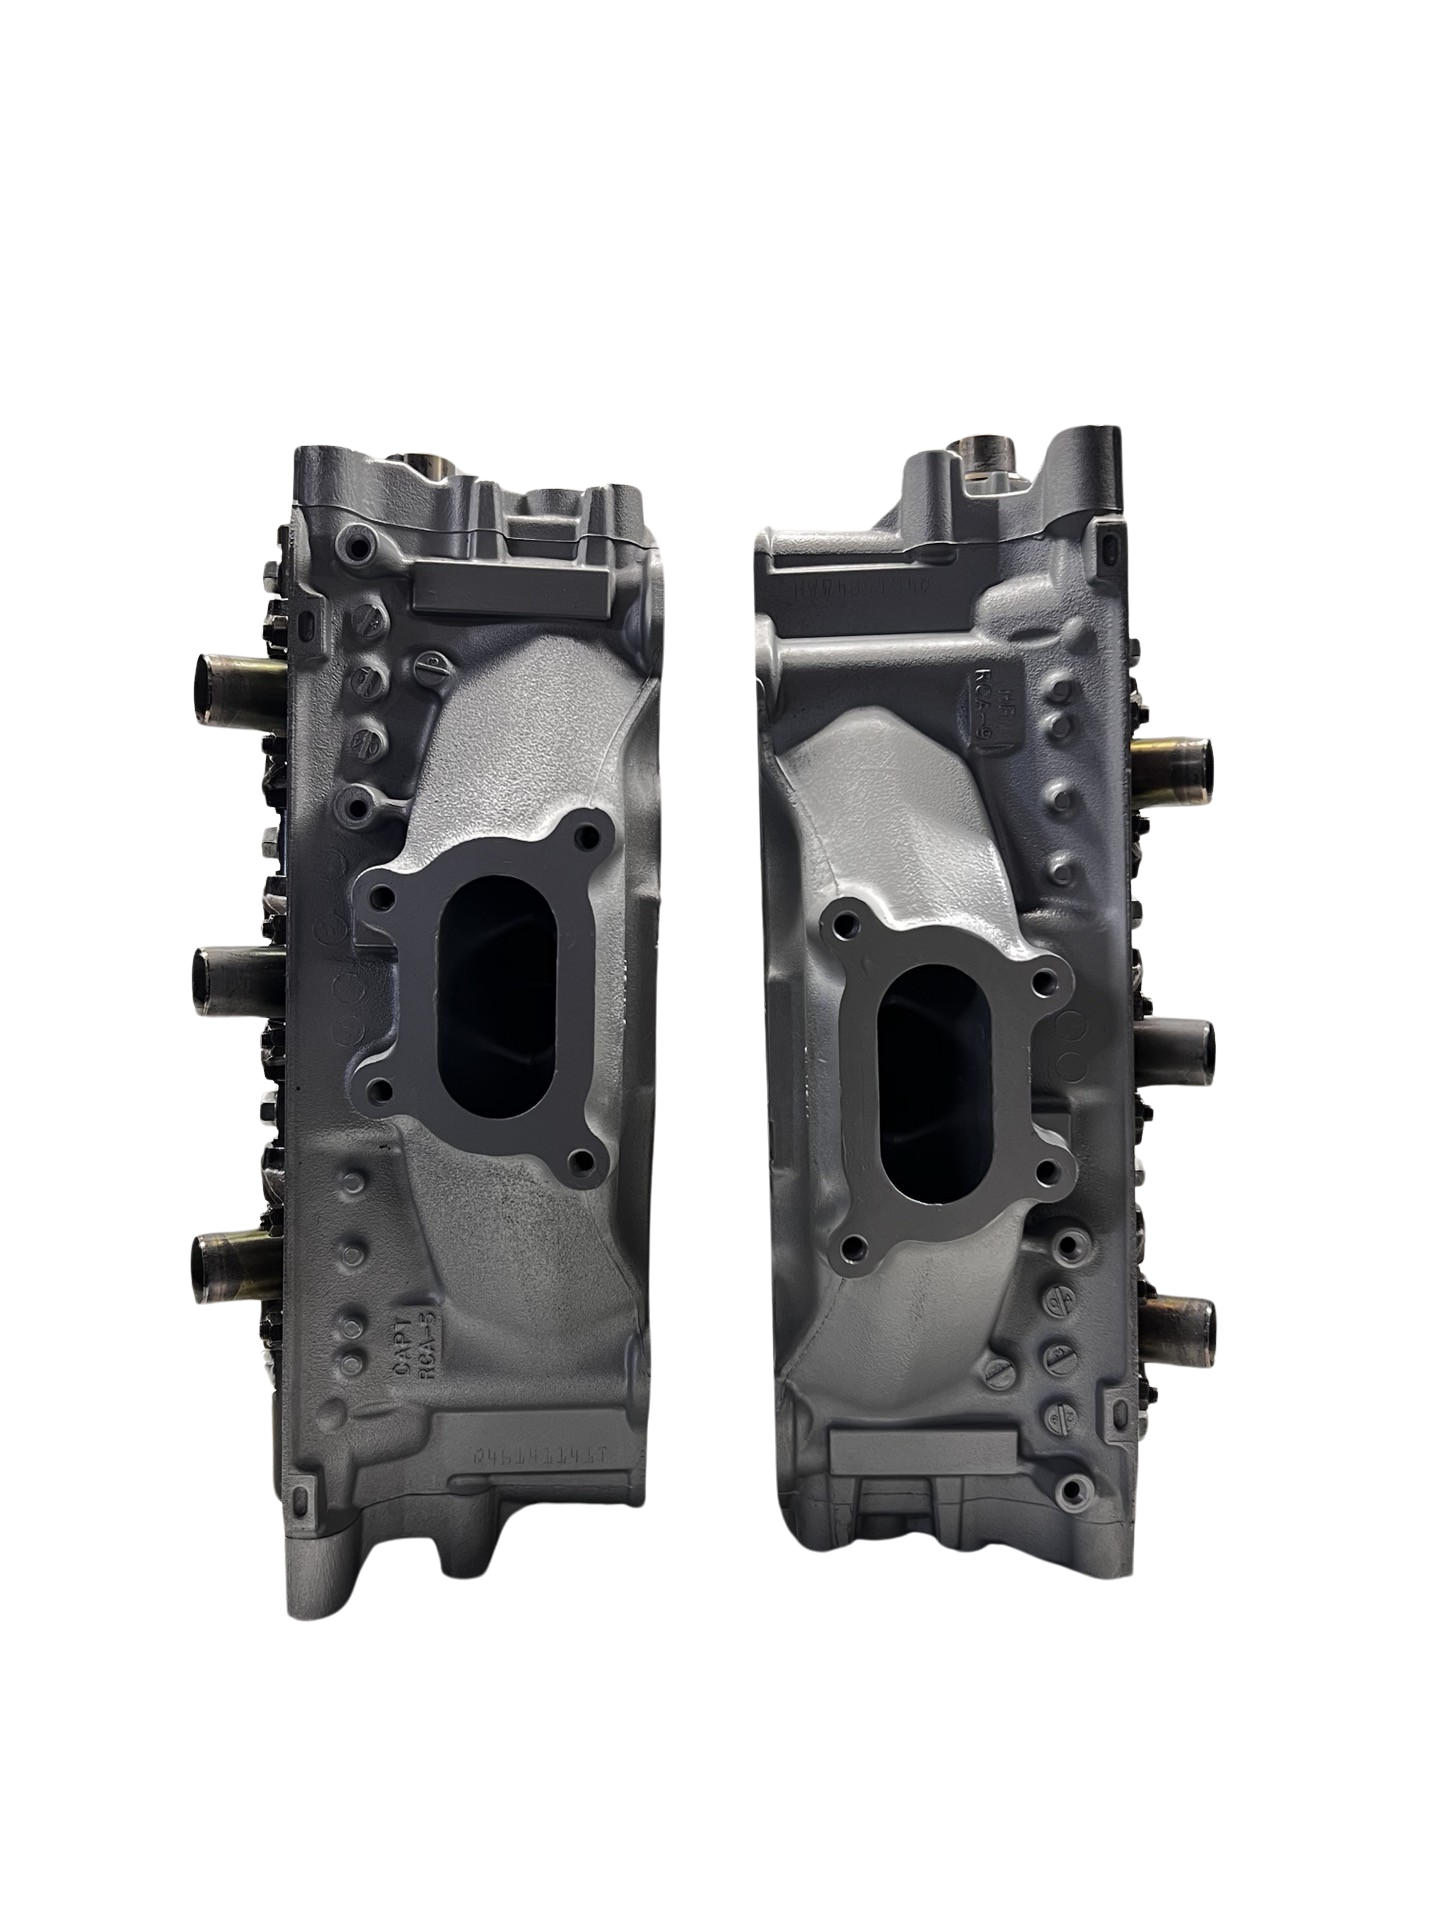 Exhaust side of cylinder heads for a Honda 3.0L Casting #RCA (SOLD IN PAIR)